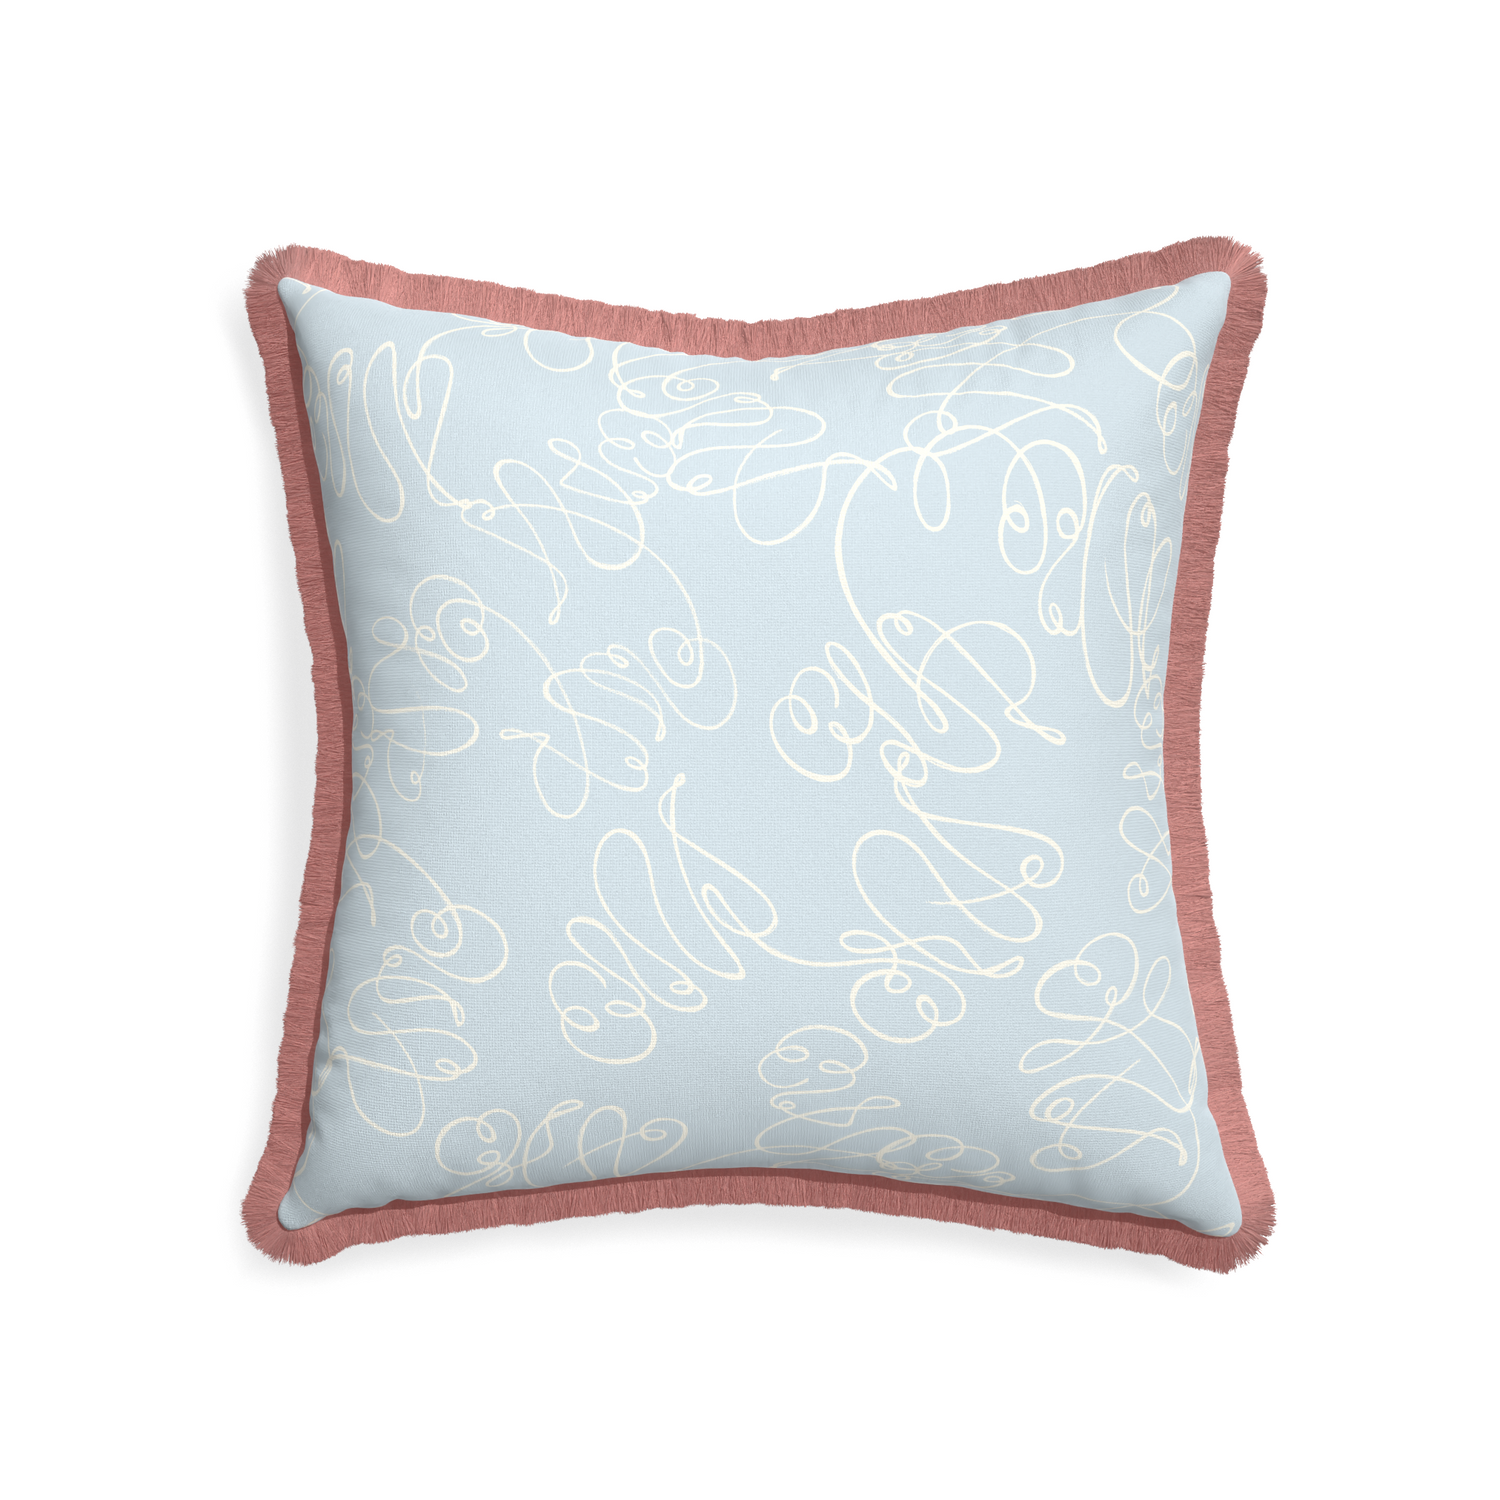 22-square mirabella custom powder blue abstractpillow with d fringe on white background